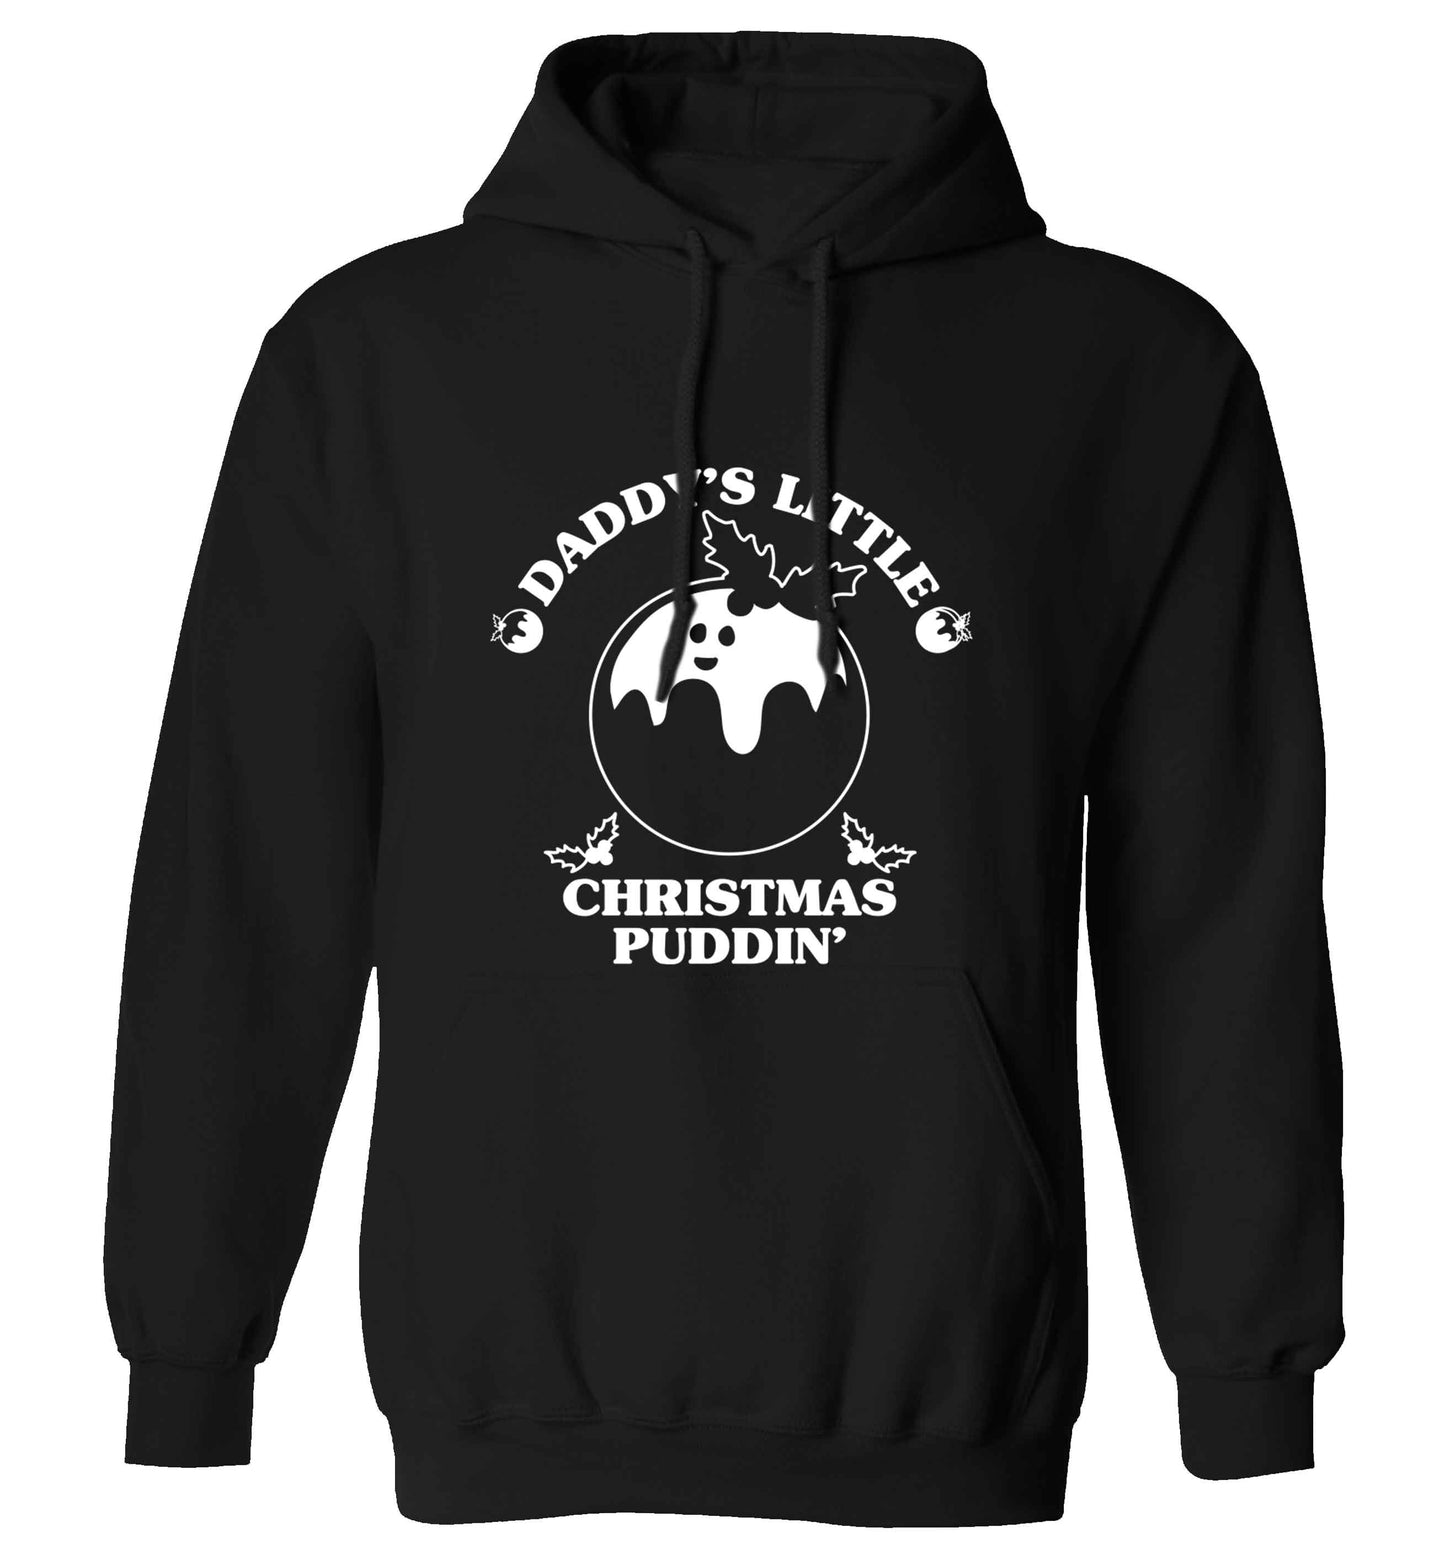 Daddy's little Christmas puddin' adults unisex black hoodie 2XL